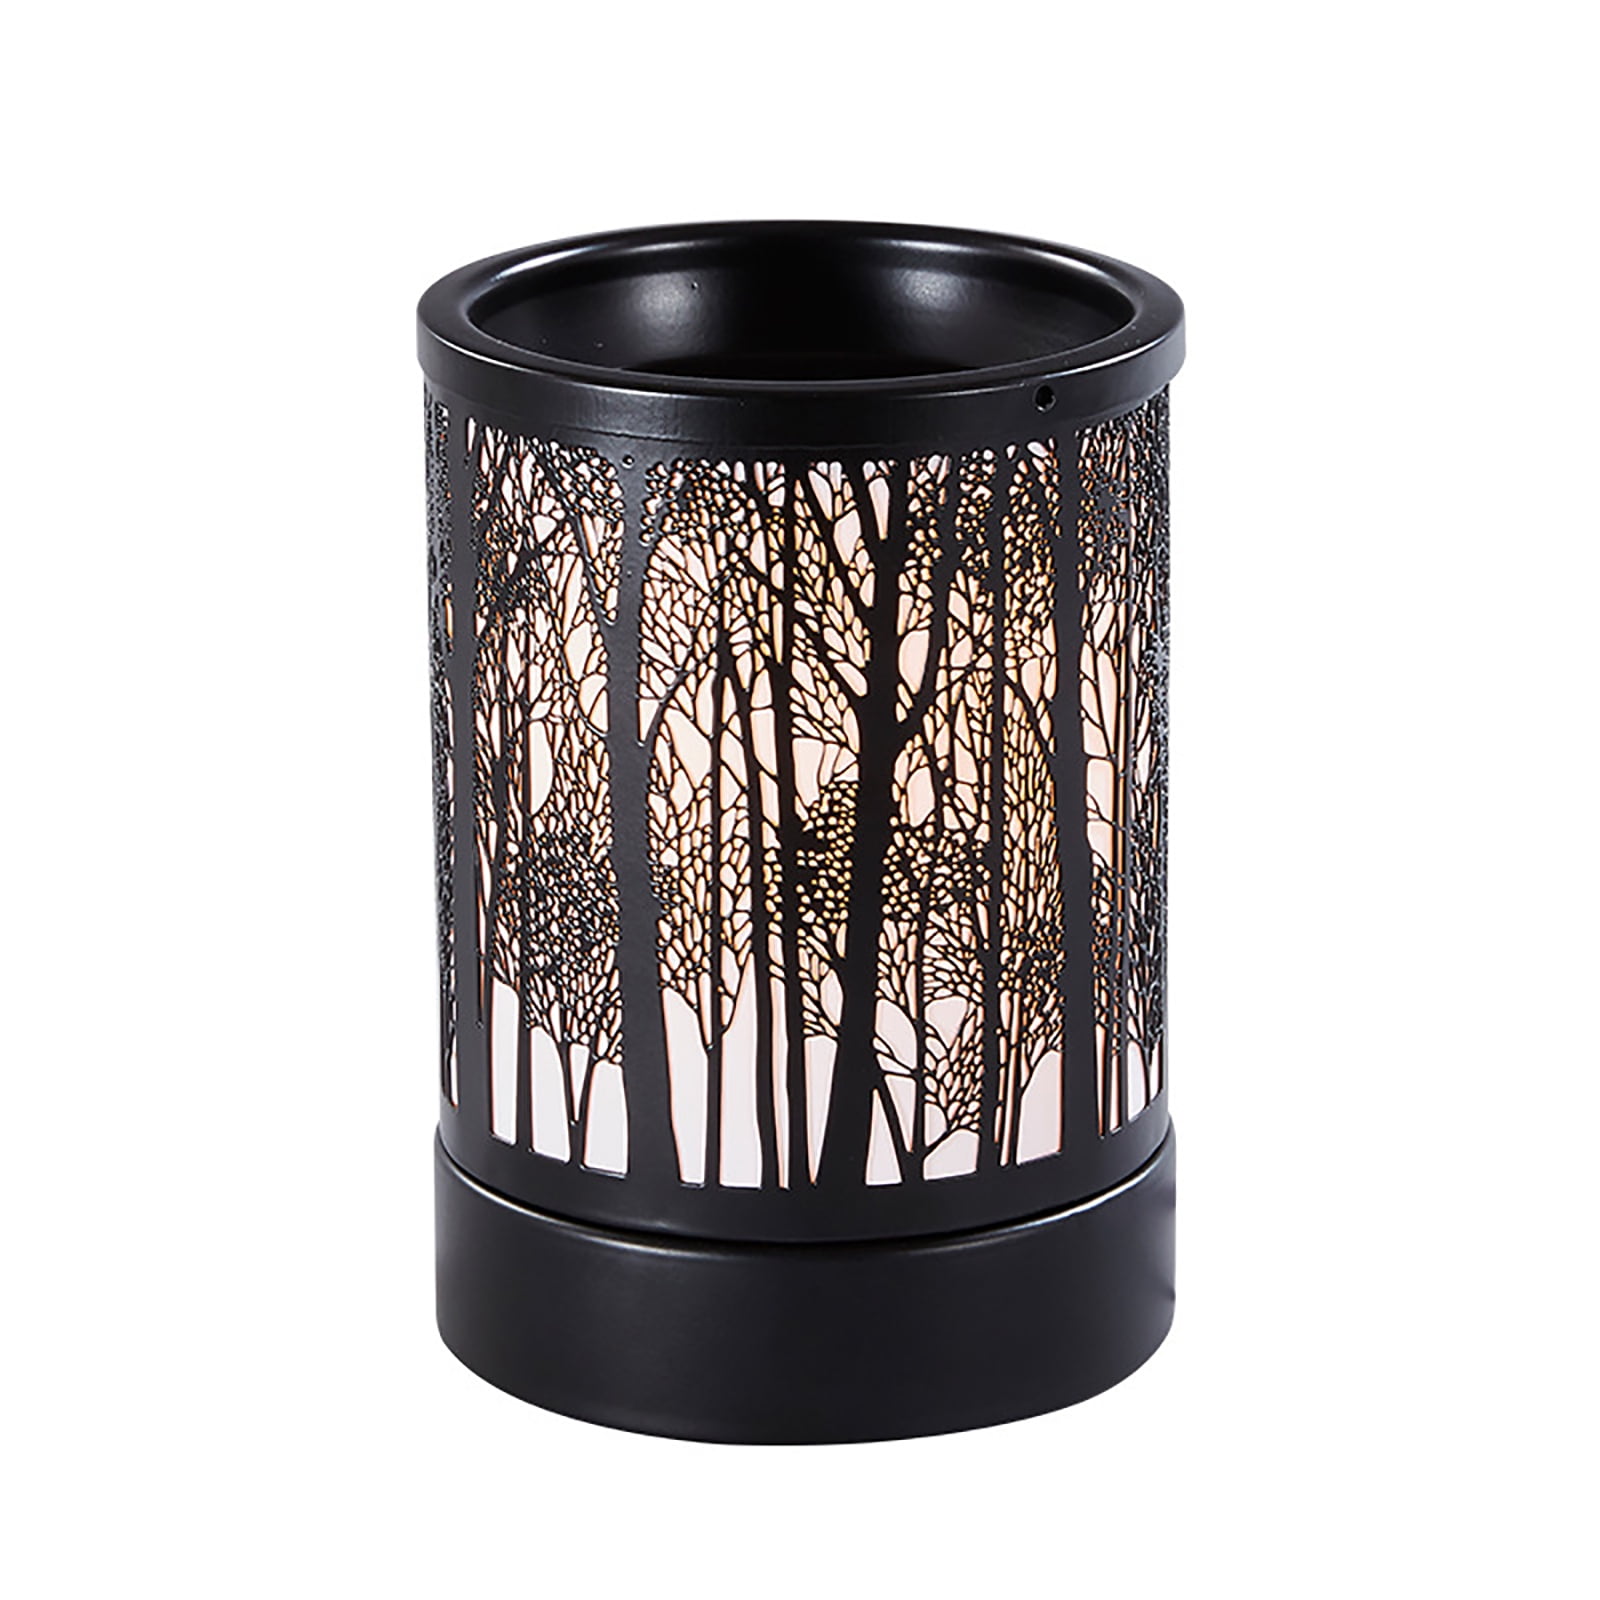 Scentsy In The Shadows Lamp Wax Scent Warmer Metal Glass Woods Trees